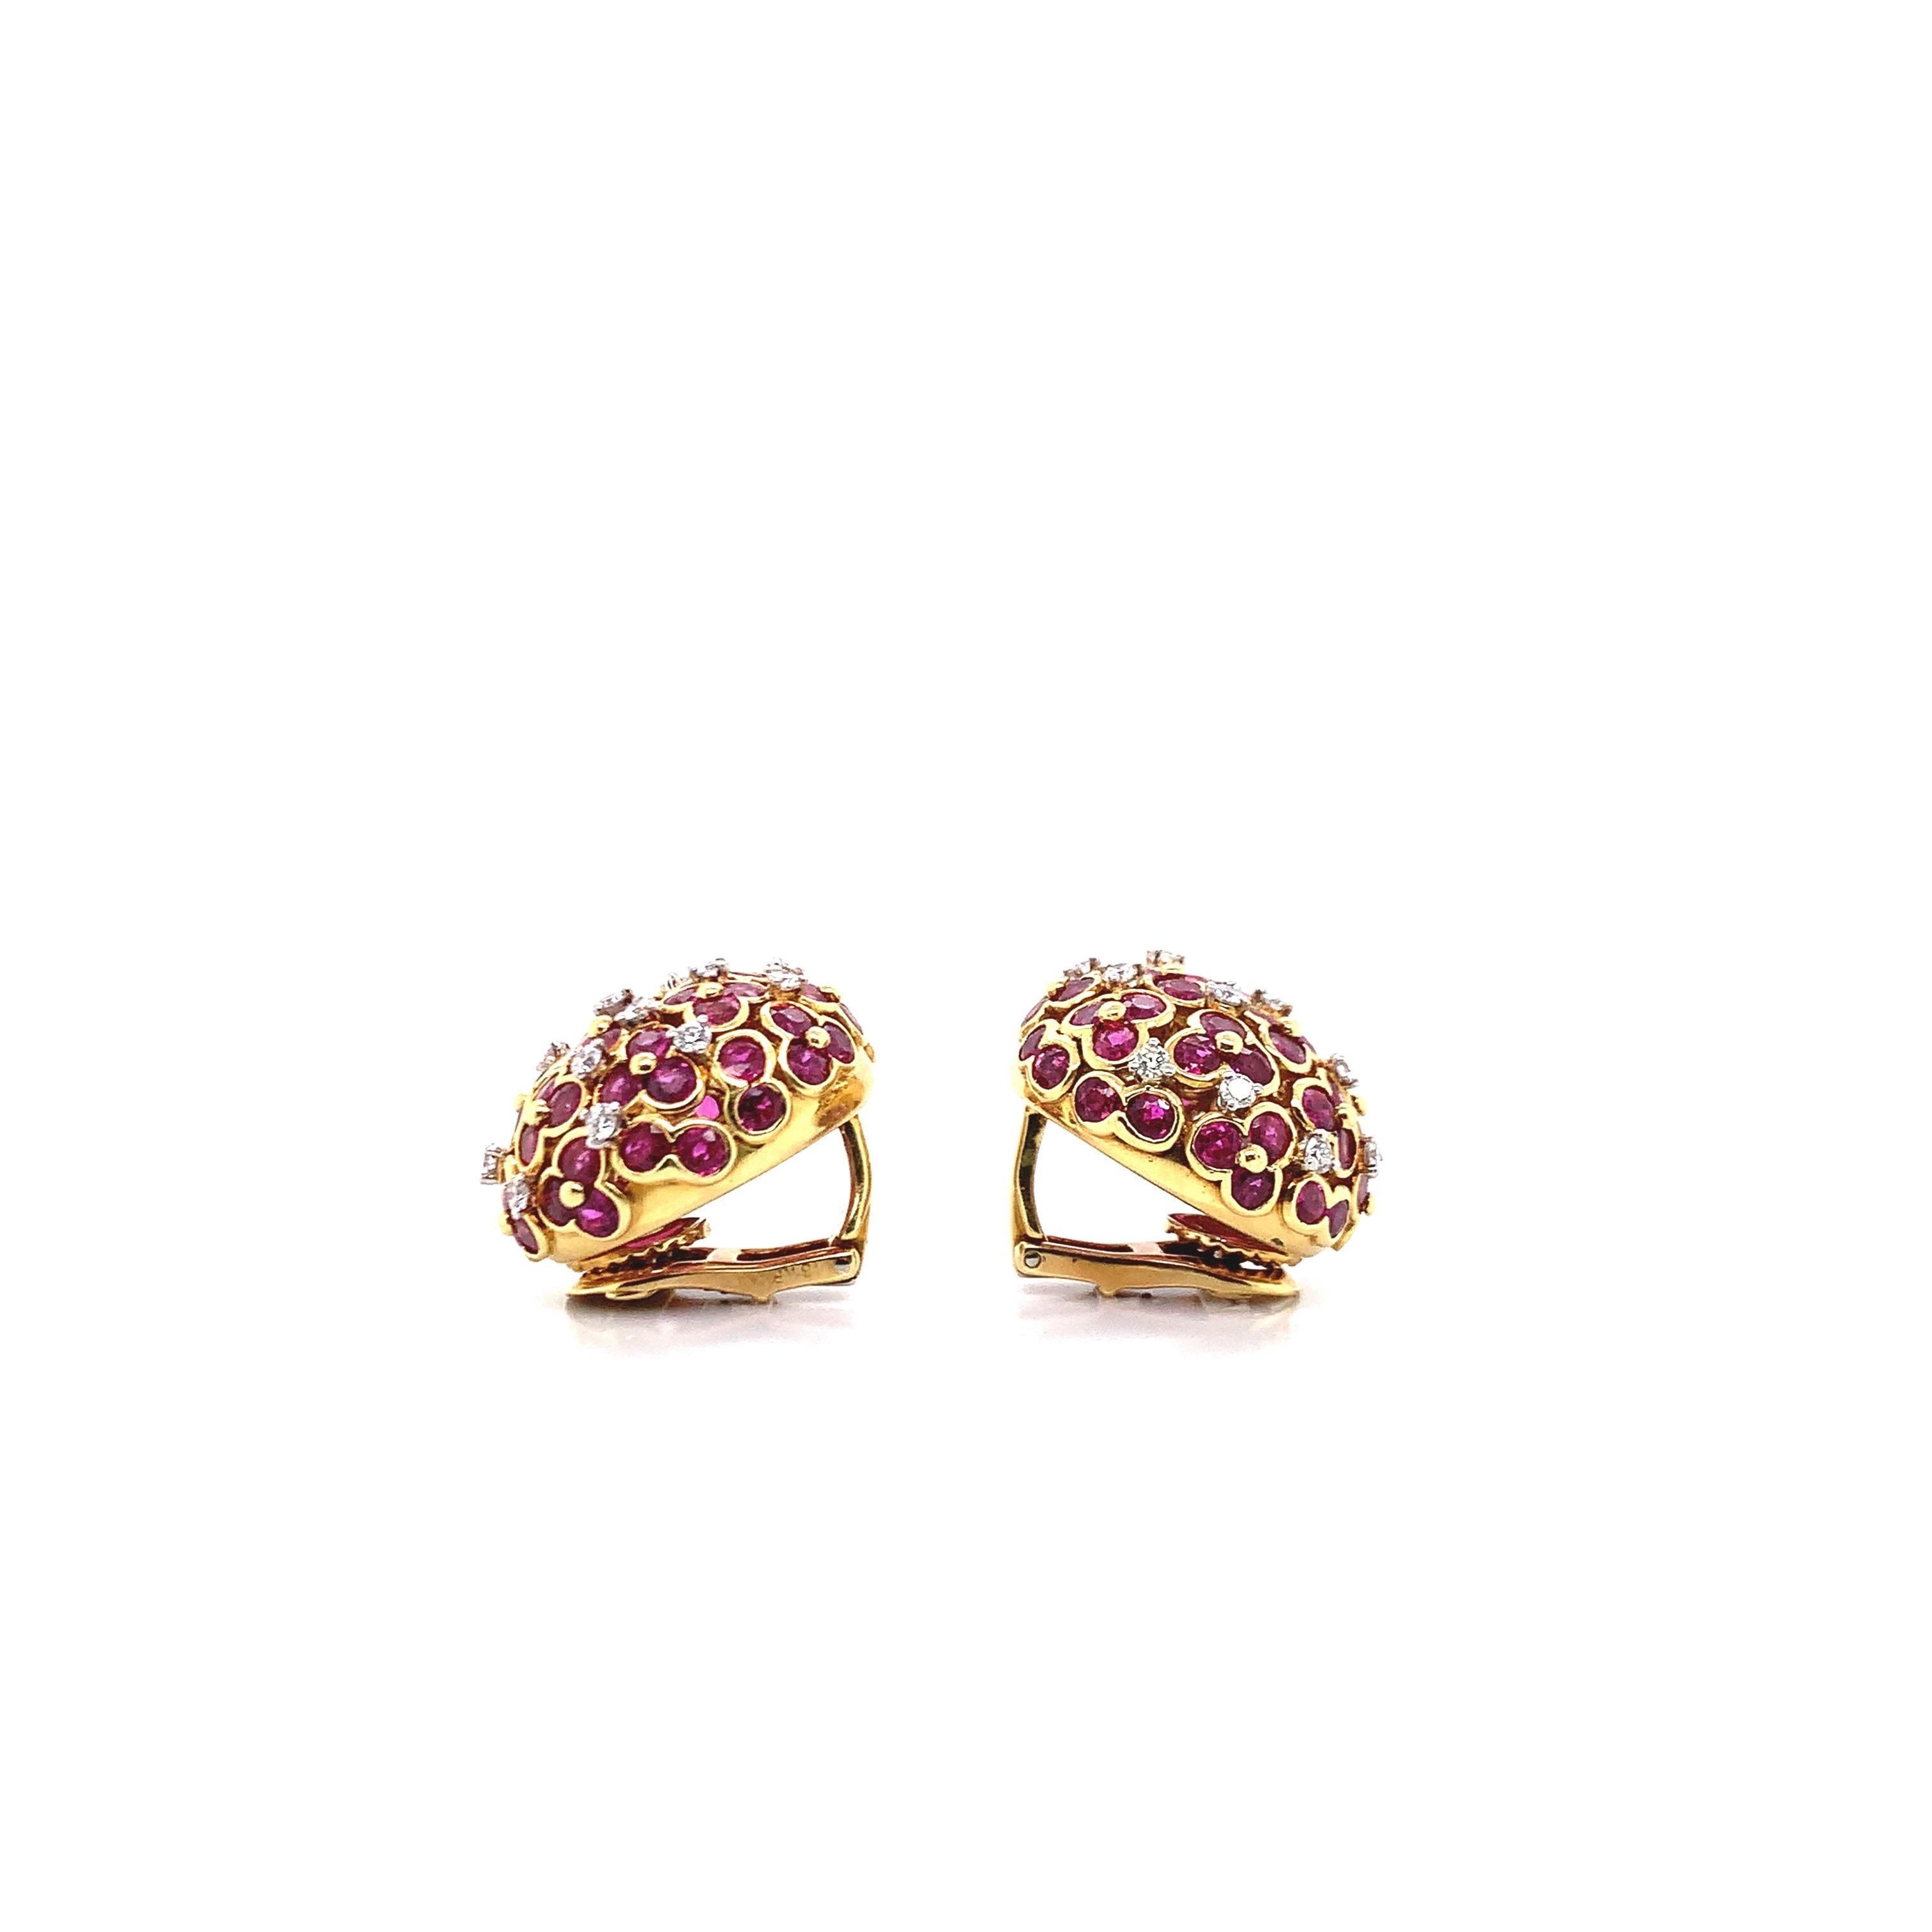 Jean Vitau 18k Yellow Gold Ruby & Diamond Earrings In Excellent Condition For Sale In New York, NY